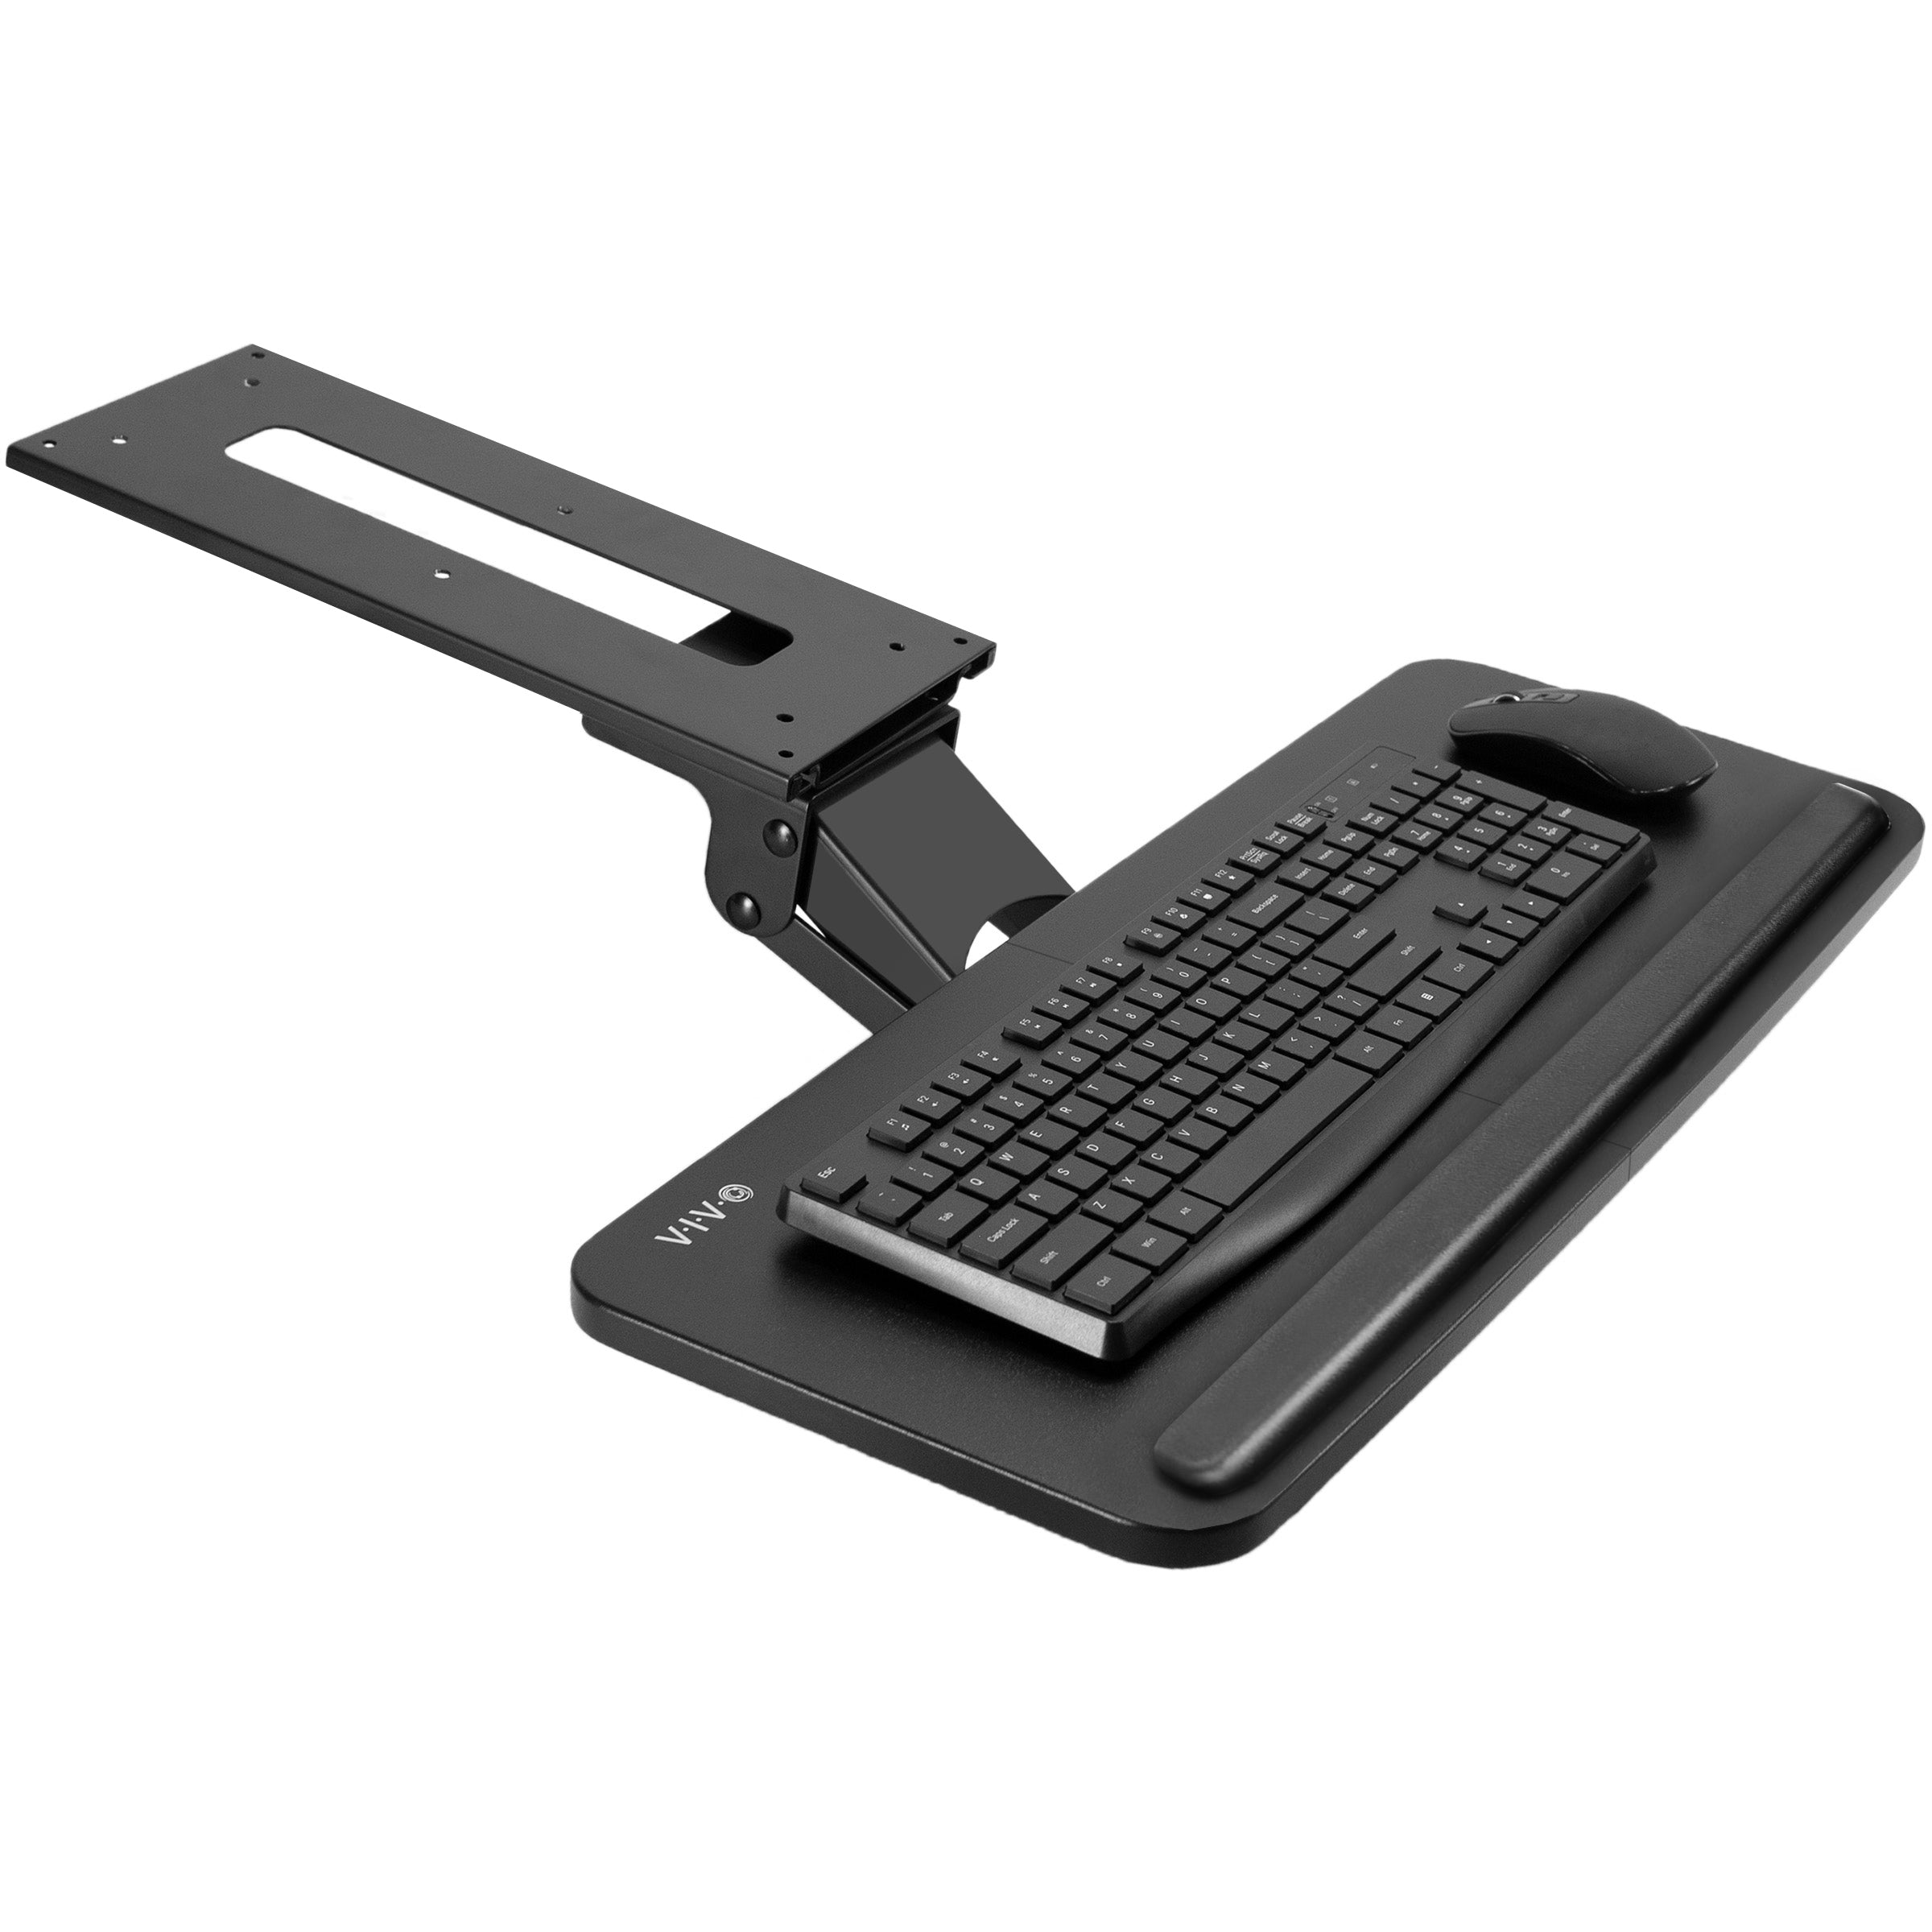 Guide to Install Sliding Keyboard Tray & Top Choices